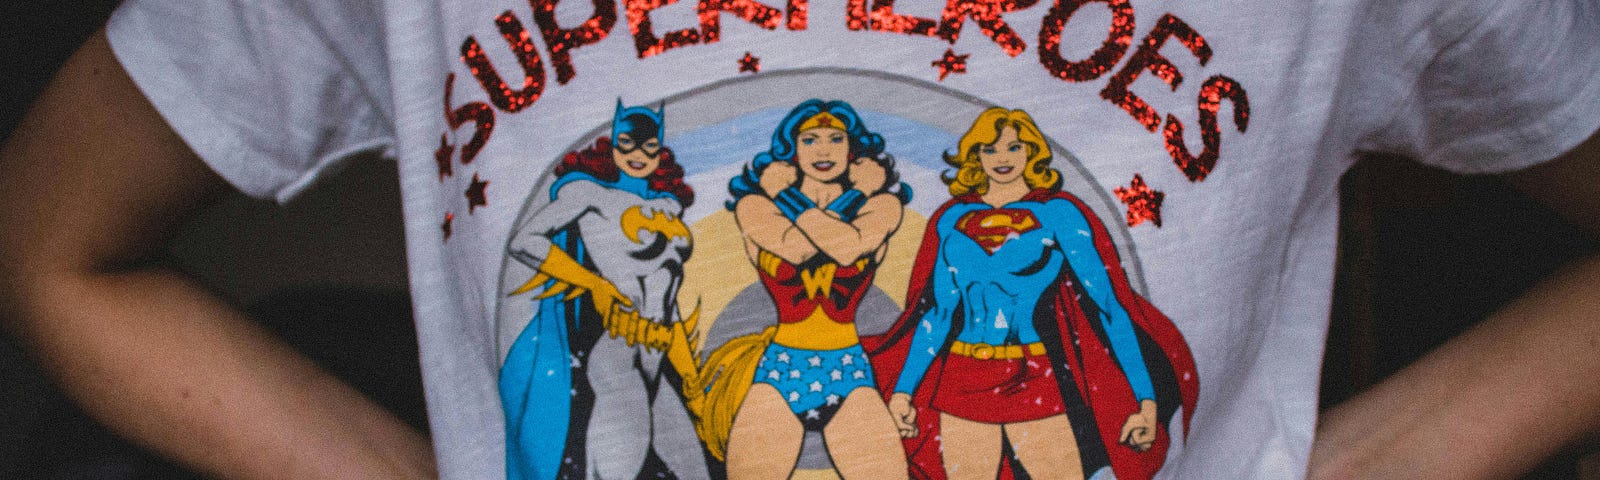 A person wearing a white t-shirt with (female) superheroes prints